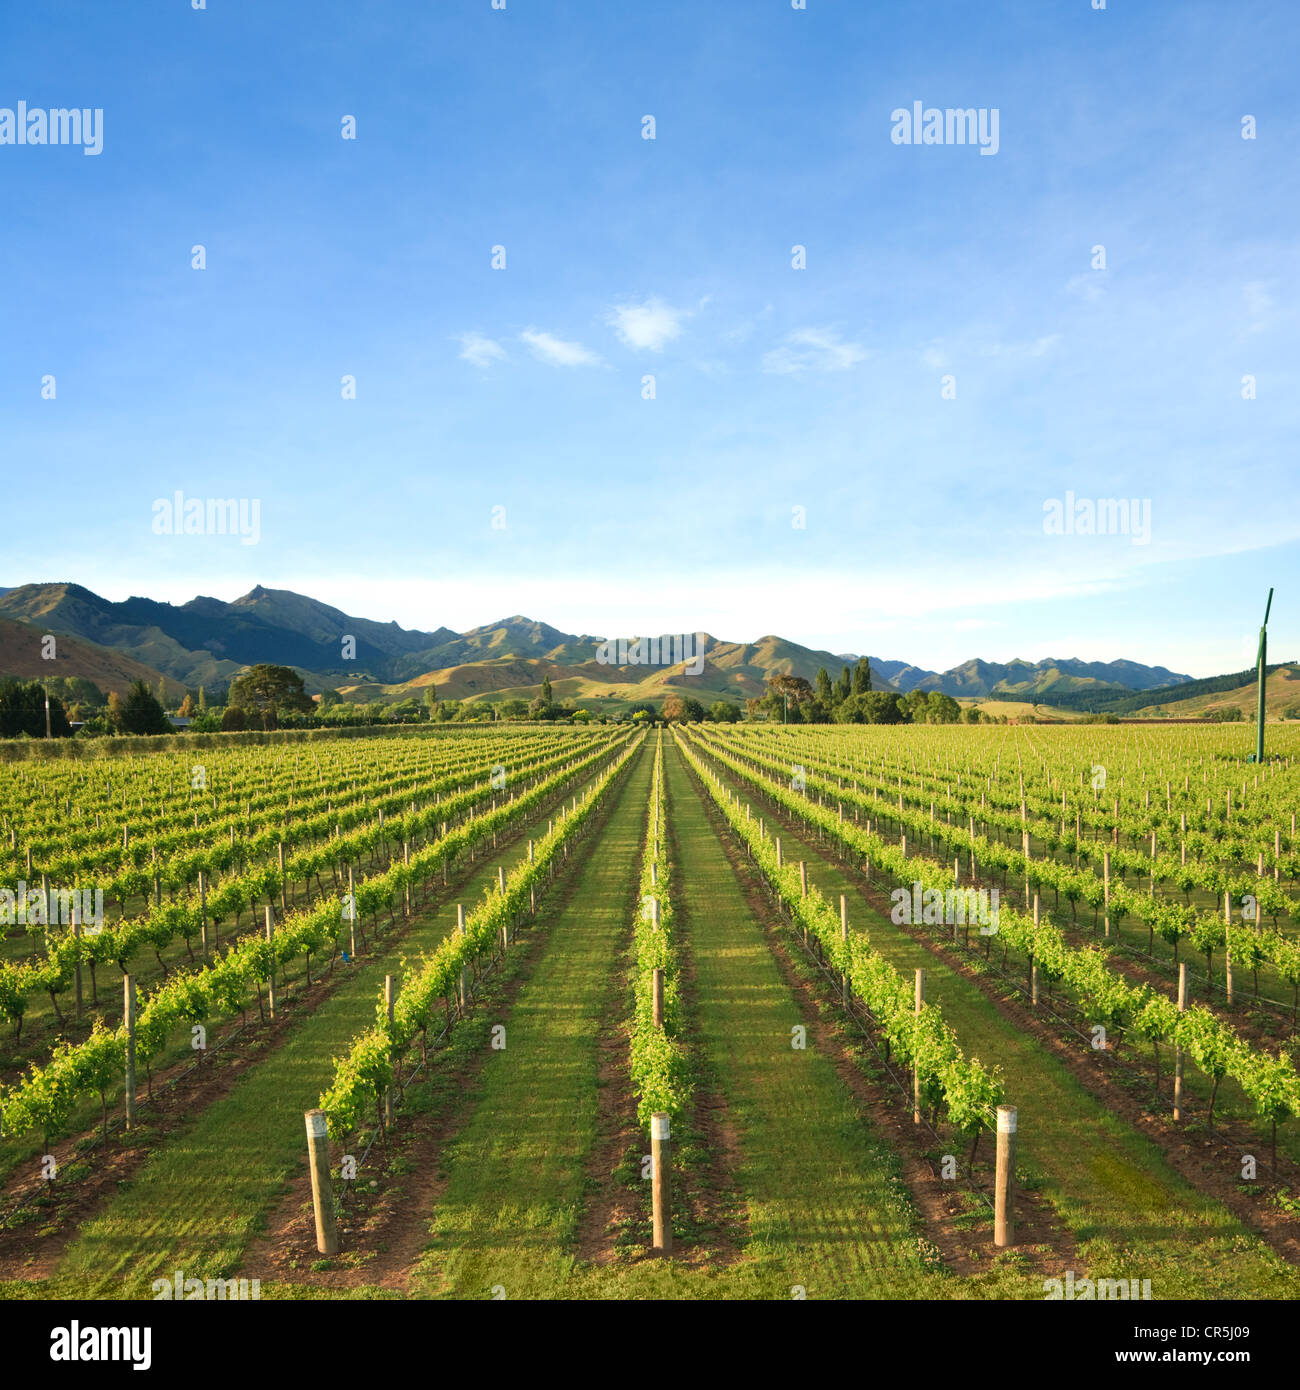 A typical vineyard in the Marlborough region of New Zealand's South island. Stock Photo